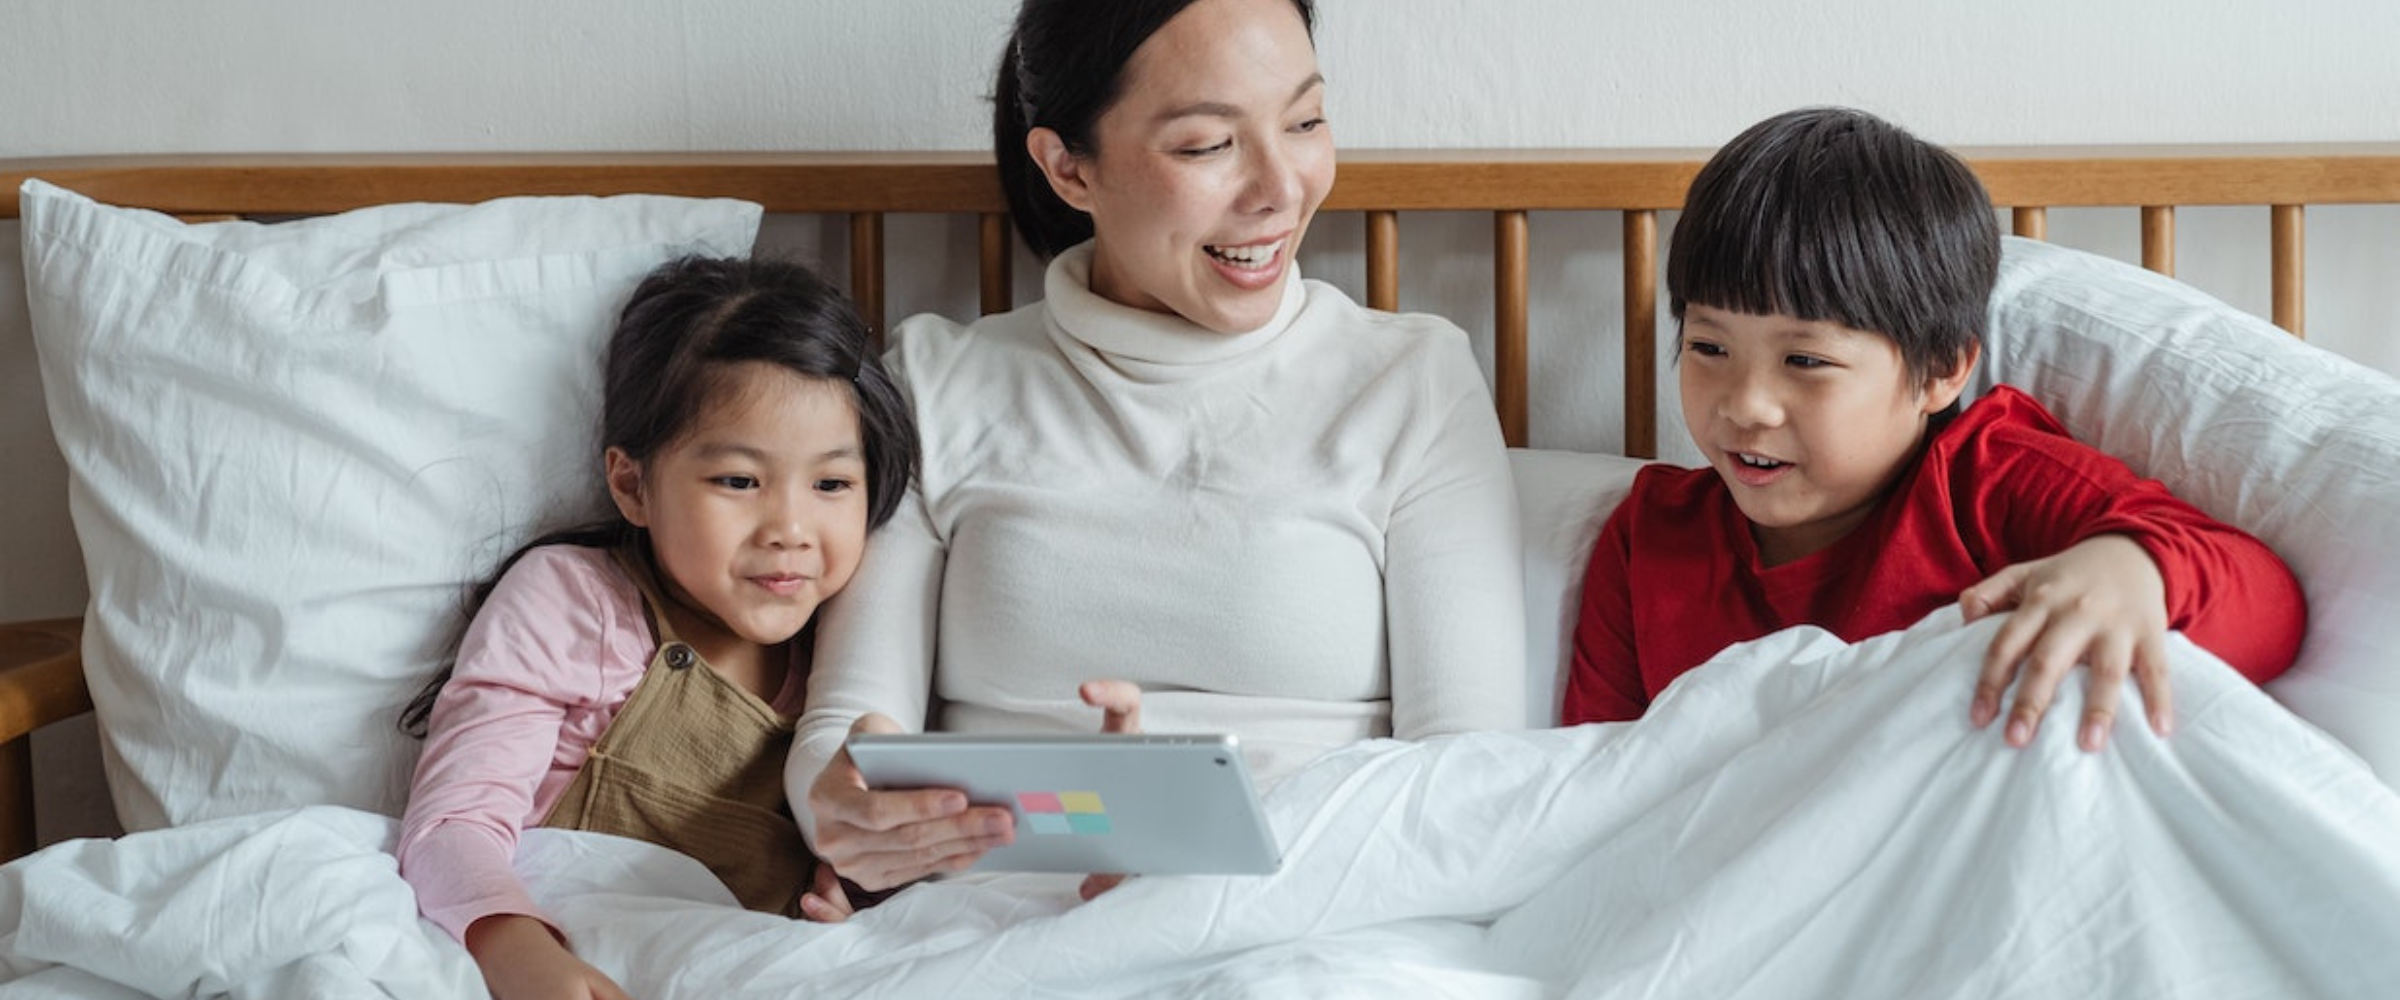 Learn how to reinvent your morning as a busy parent